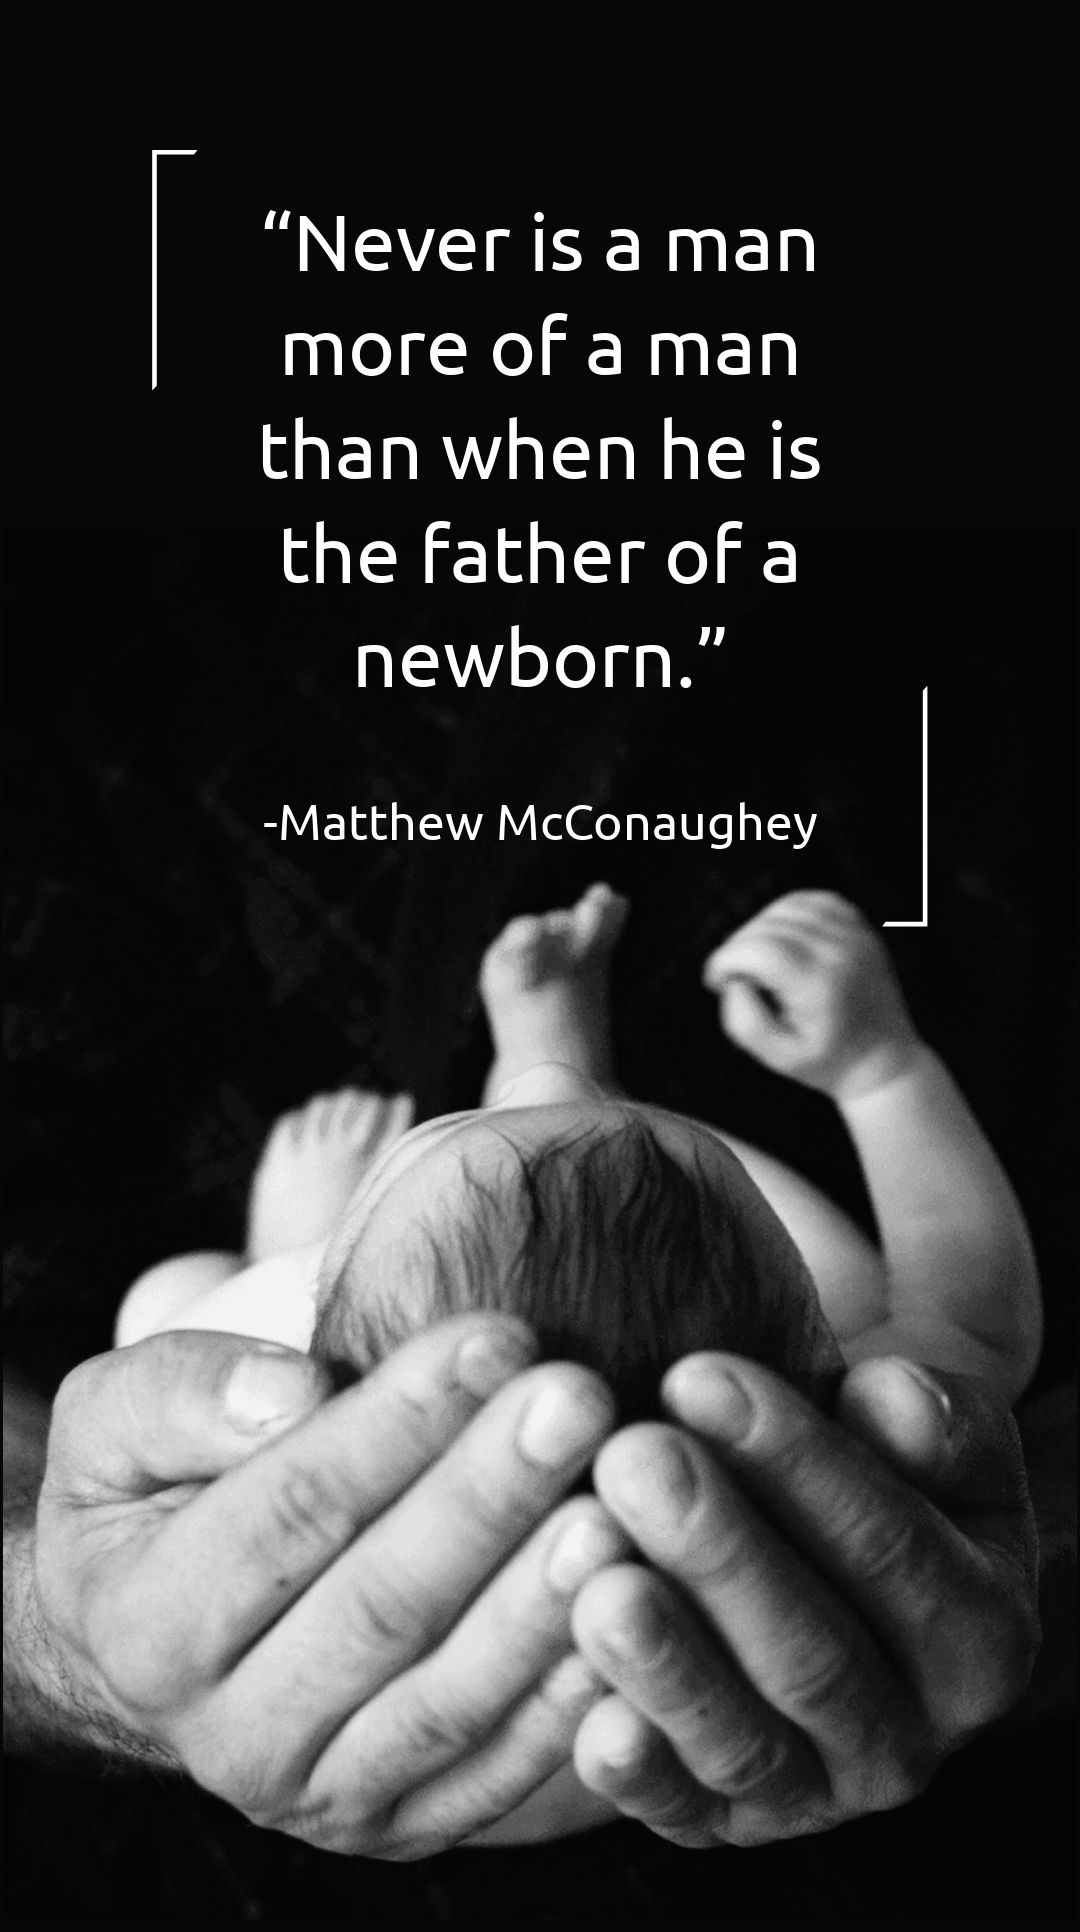 Free Matthew McConaughey - Never is a man more of a man than when he is the father of a newborn.